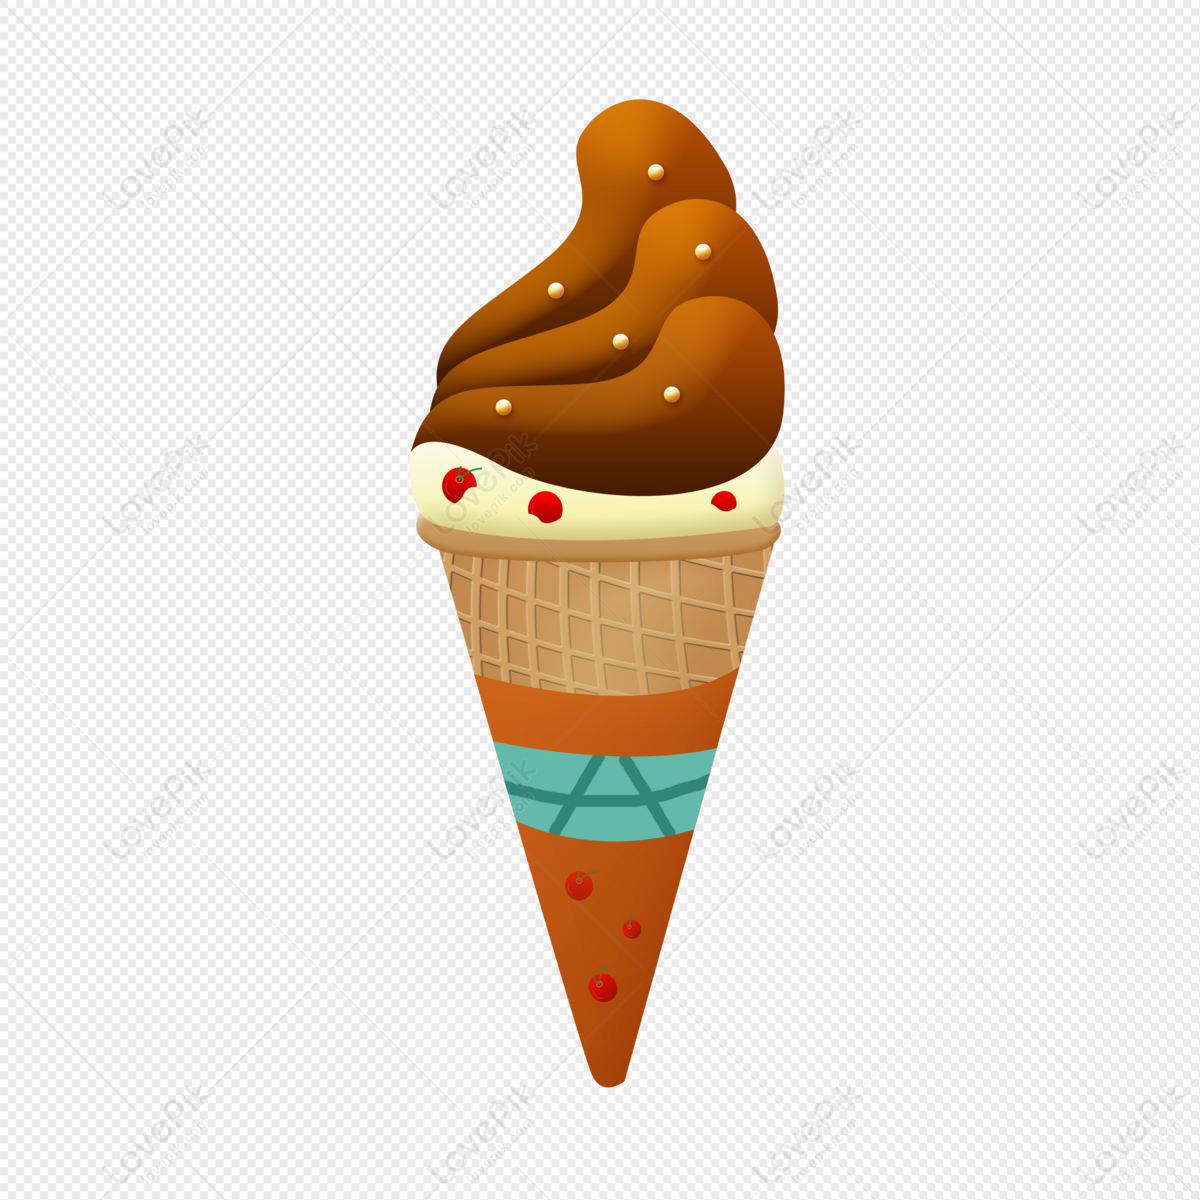 Cartoon Chocolate Ice Cream Ice Cream Free PNG And Clipart Image For Free  Download - Lovepik | 401398429